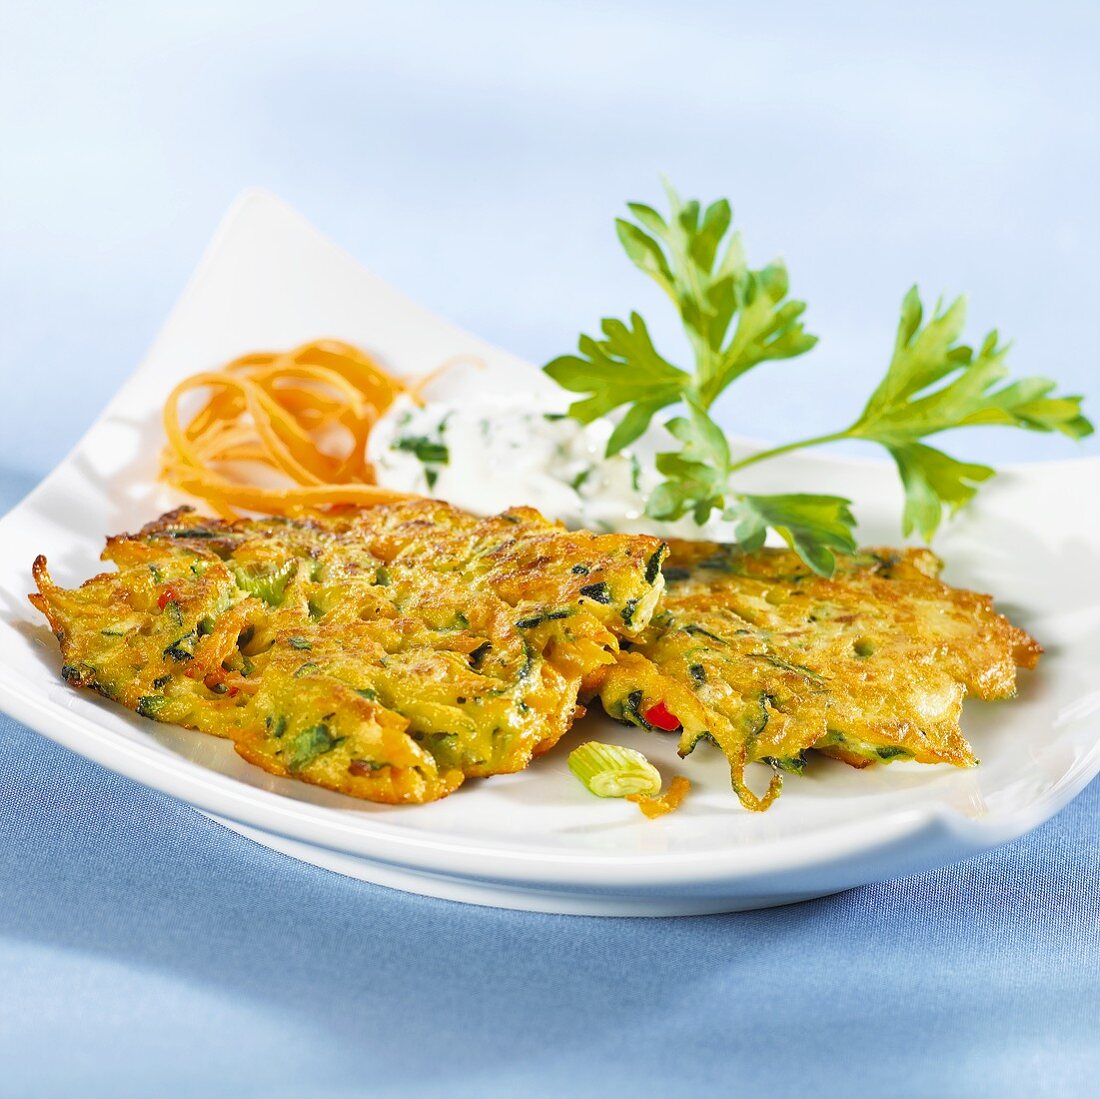 Carrot and courgette pancakes